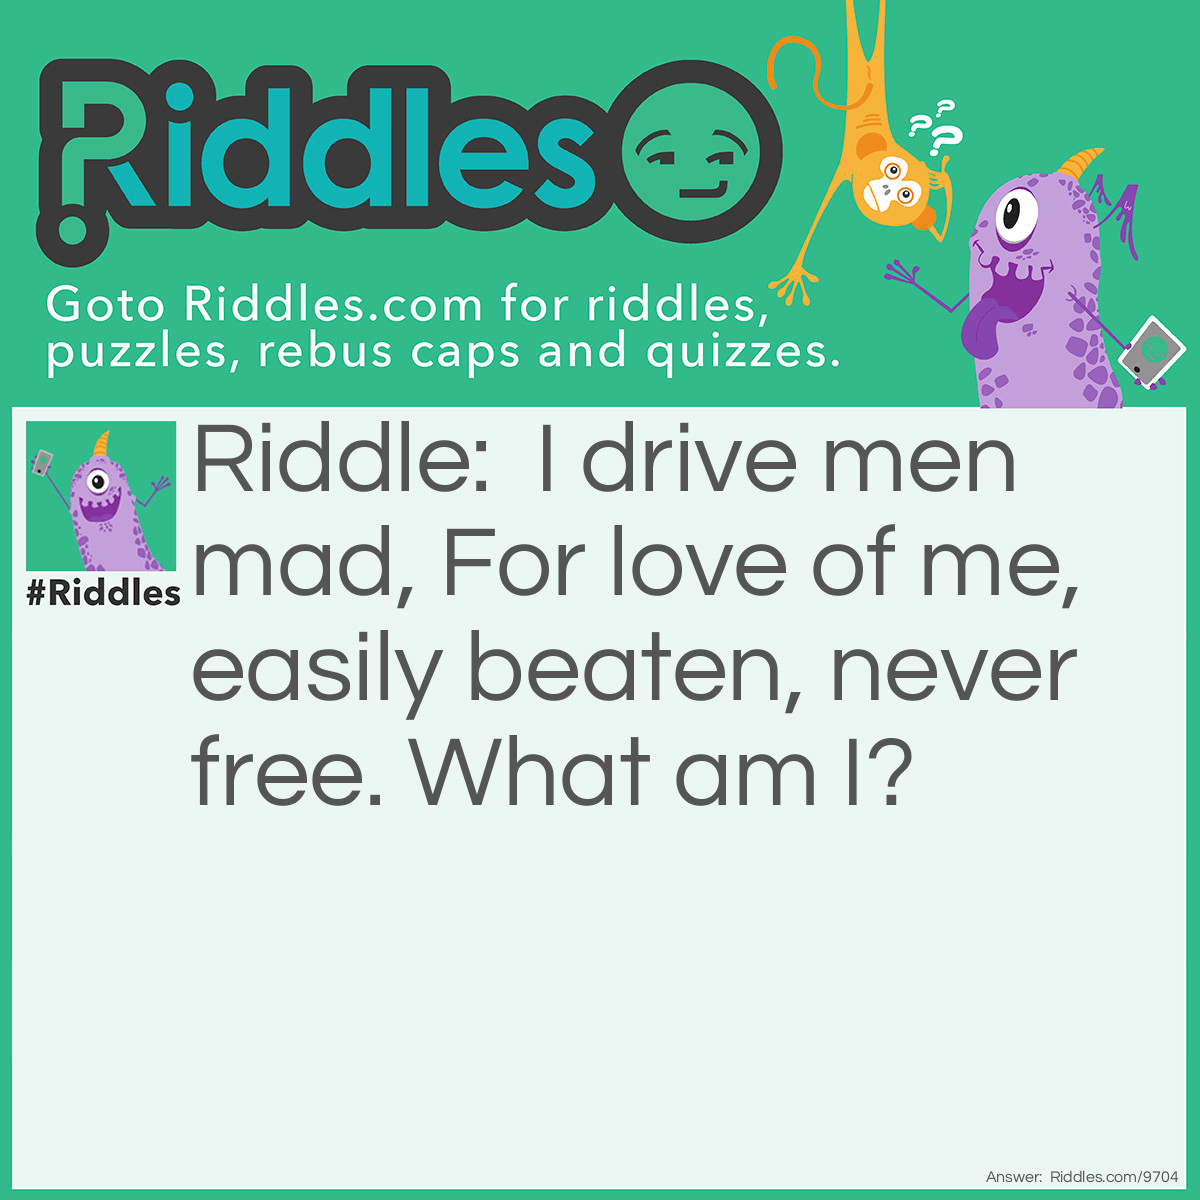 Riddle: I drive men mad, For love of me, easily beaten, never free. What am I? Answer: Gold.